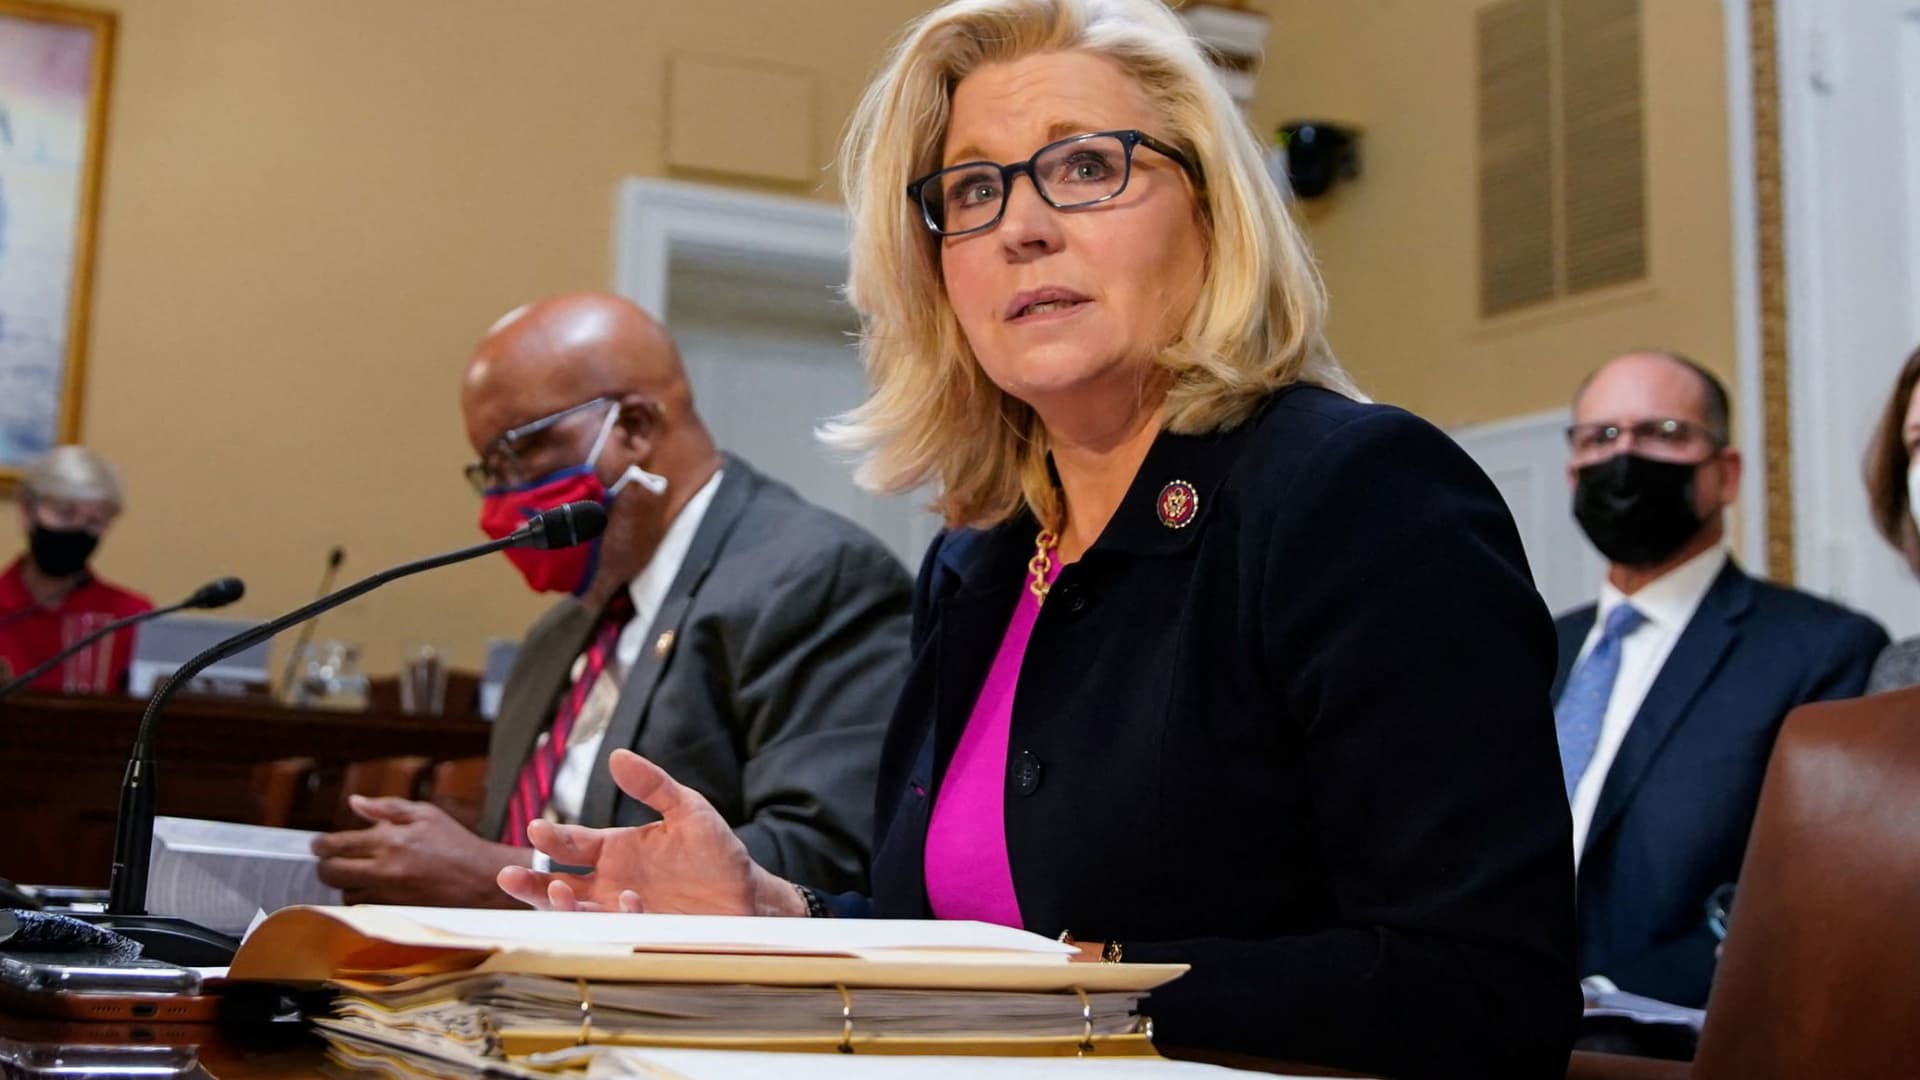 U.S. Representative Liz Cheney (R-WY) testifies before the House Rules Committee about the January 6th Select Committee recommendation that the House hold Mark Meadows in criminal contempt of Congress at the U.S. Capitol building in Washington, December 14, 2021.